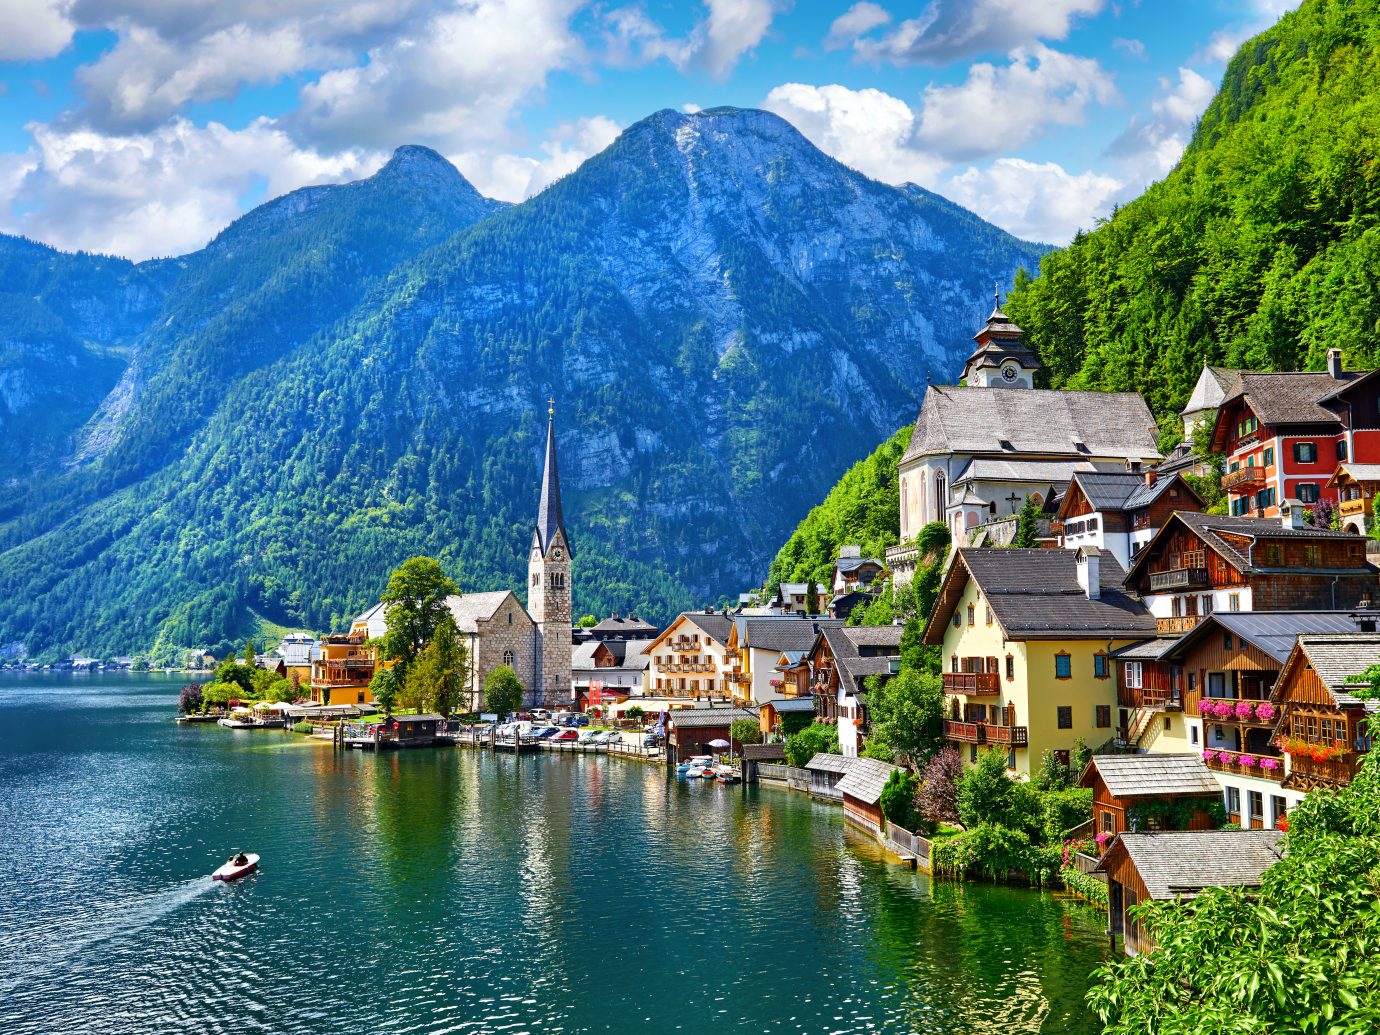 View of Hallstattersee Lake and Alps mountains summits